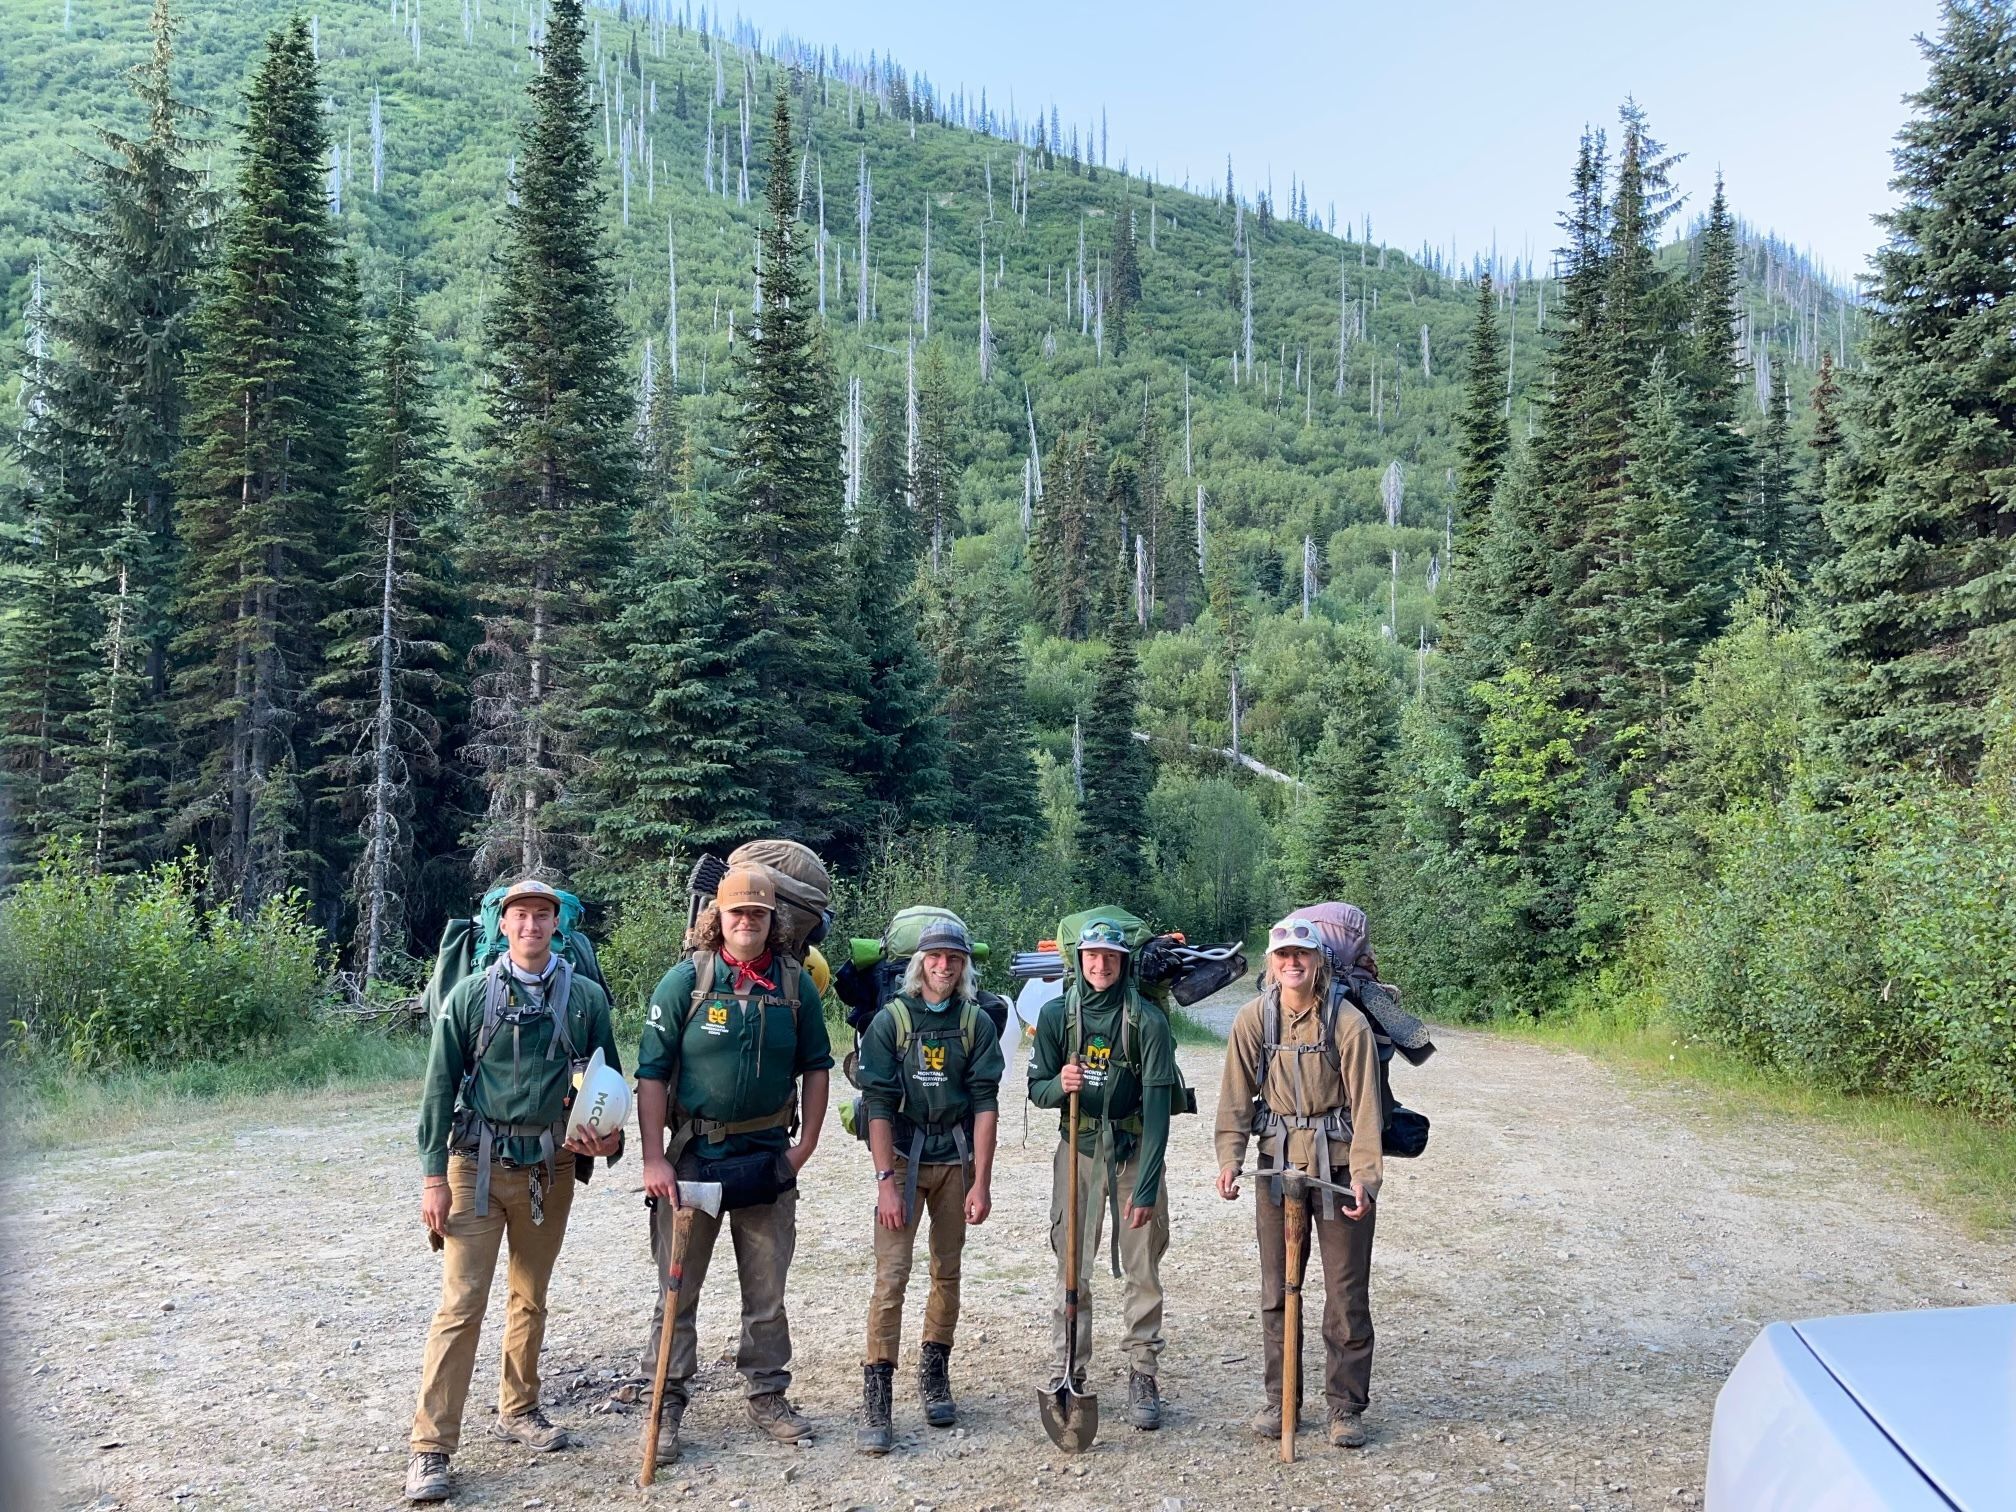 A crew wearing backpacks and gear, stands smiling before a trailhead.